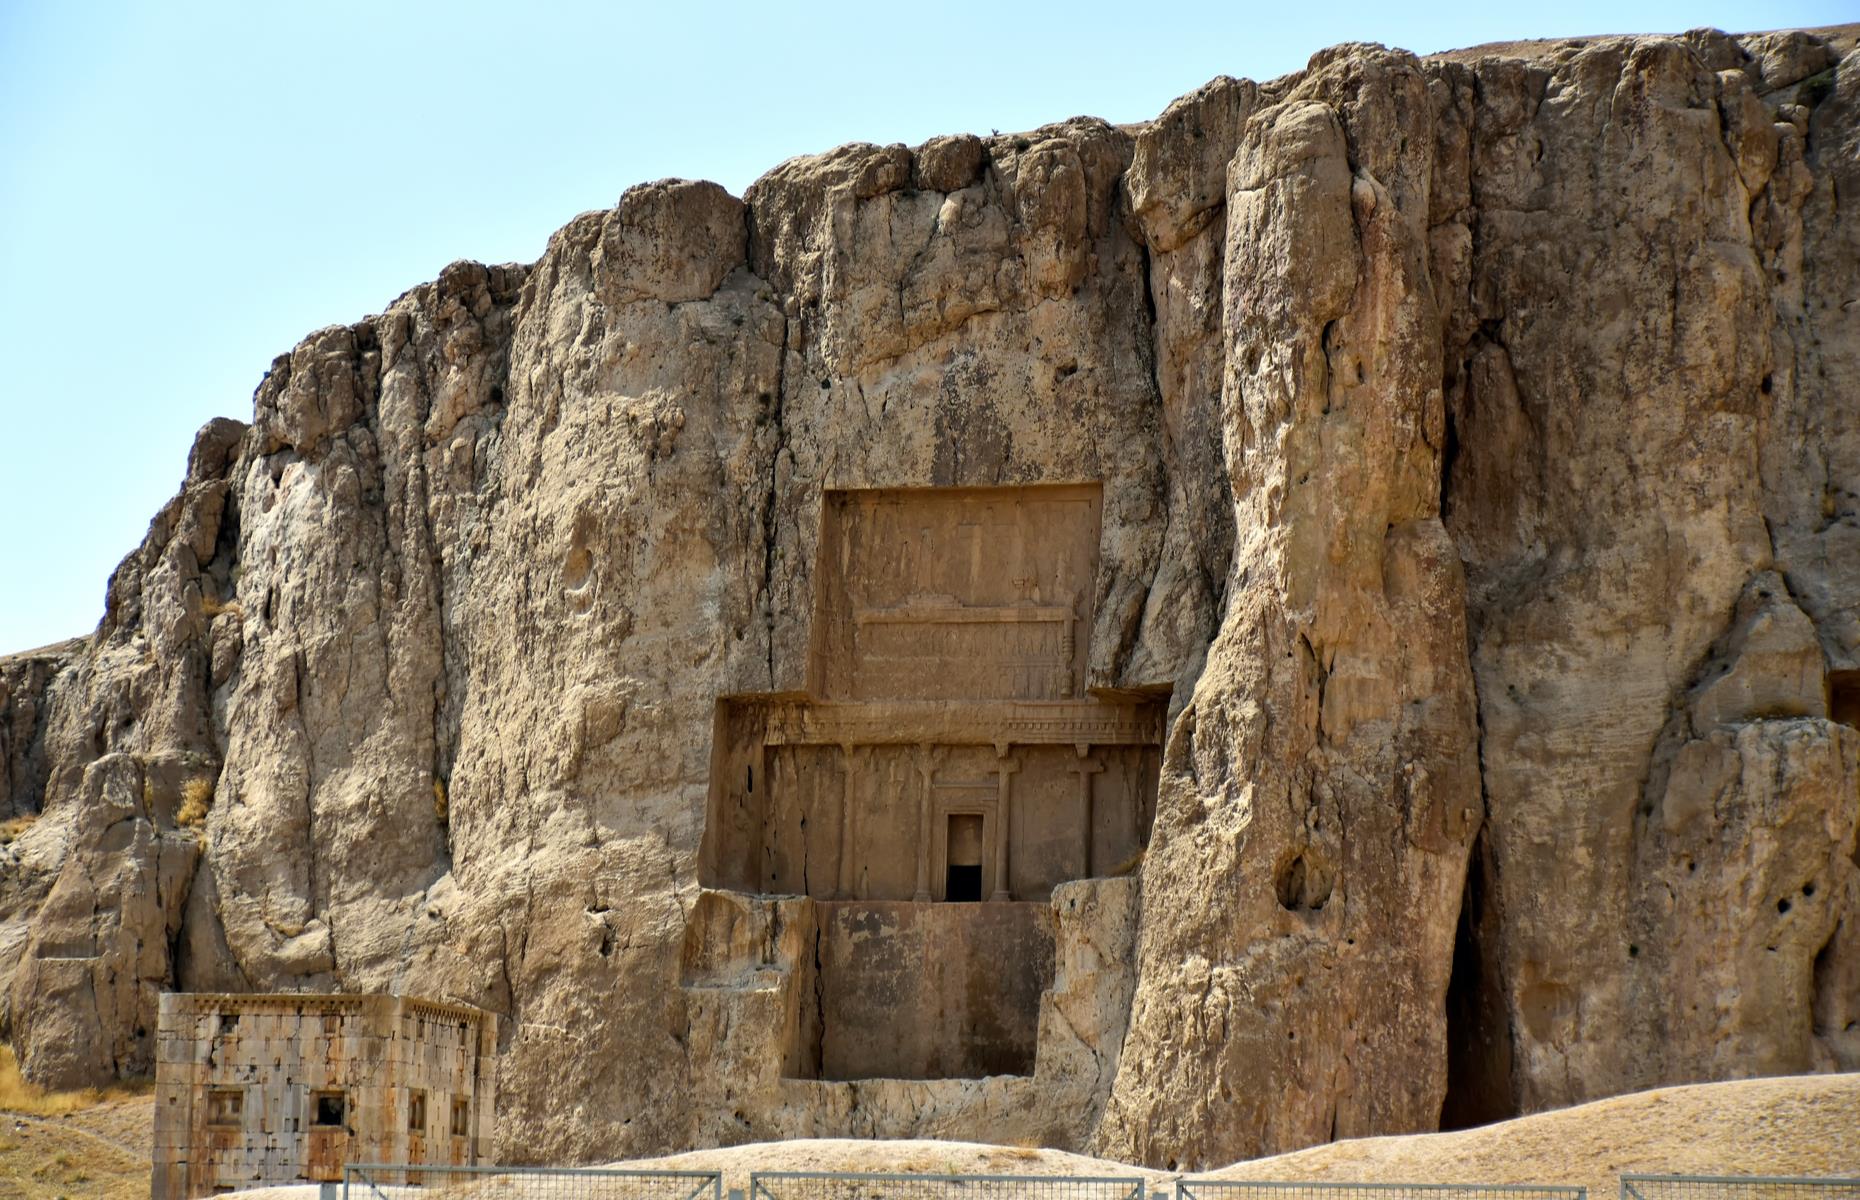 <p>Exquisite relief carvings adorn panels above the openings of each tomb which date back to the 4th and 5th centuries BC. Elsewhere large, carved rock reliefs are cut into the mountain façade. These richly decorated reliefs were carved by the Sasanians in the 3rd century AD to commemorate the battles of the Achaemenid dynasty. As well as being a royal necropolis, Naqsh-e Rostam (meaning Throne of Rustam) became a major ceremonial centre for the Sasanians until the 7th century.</p>